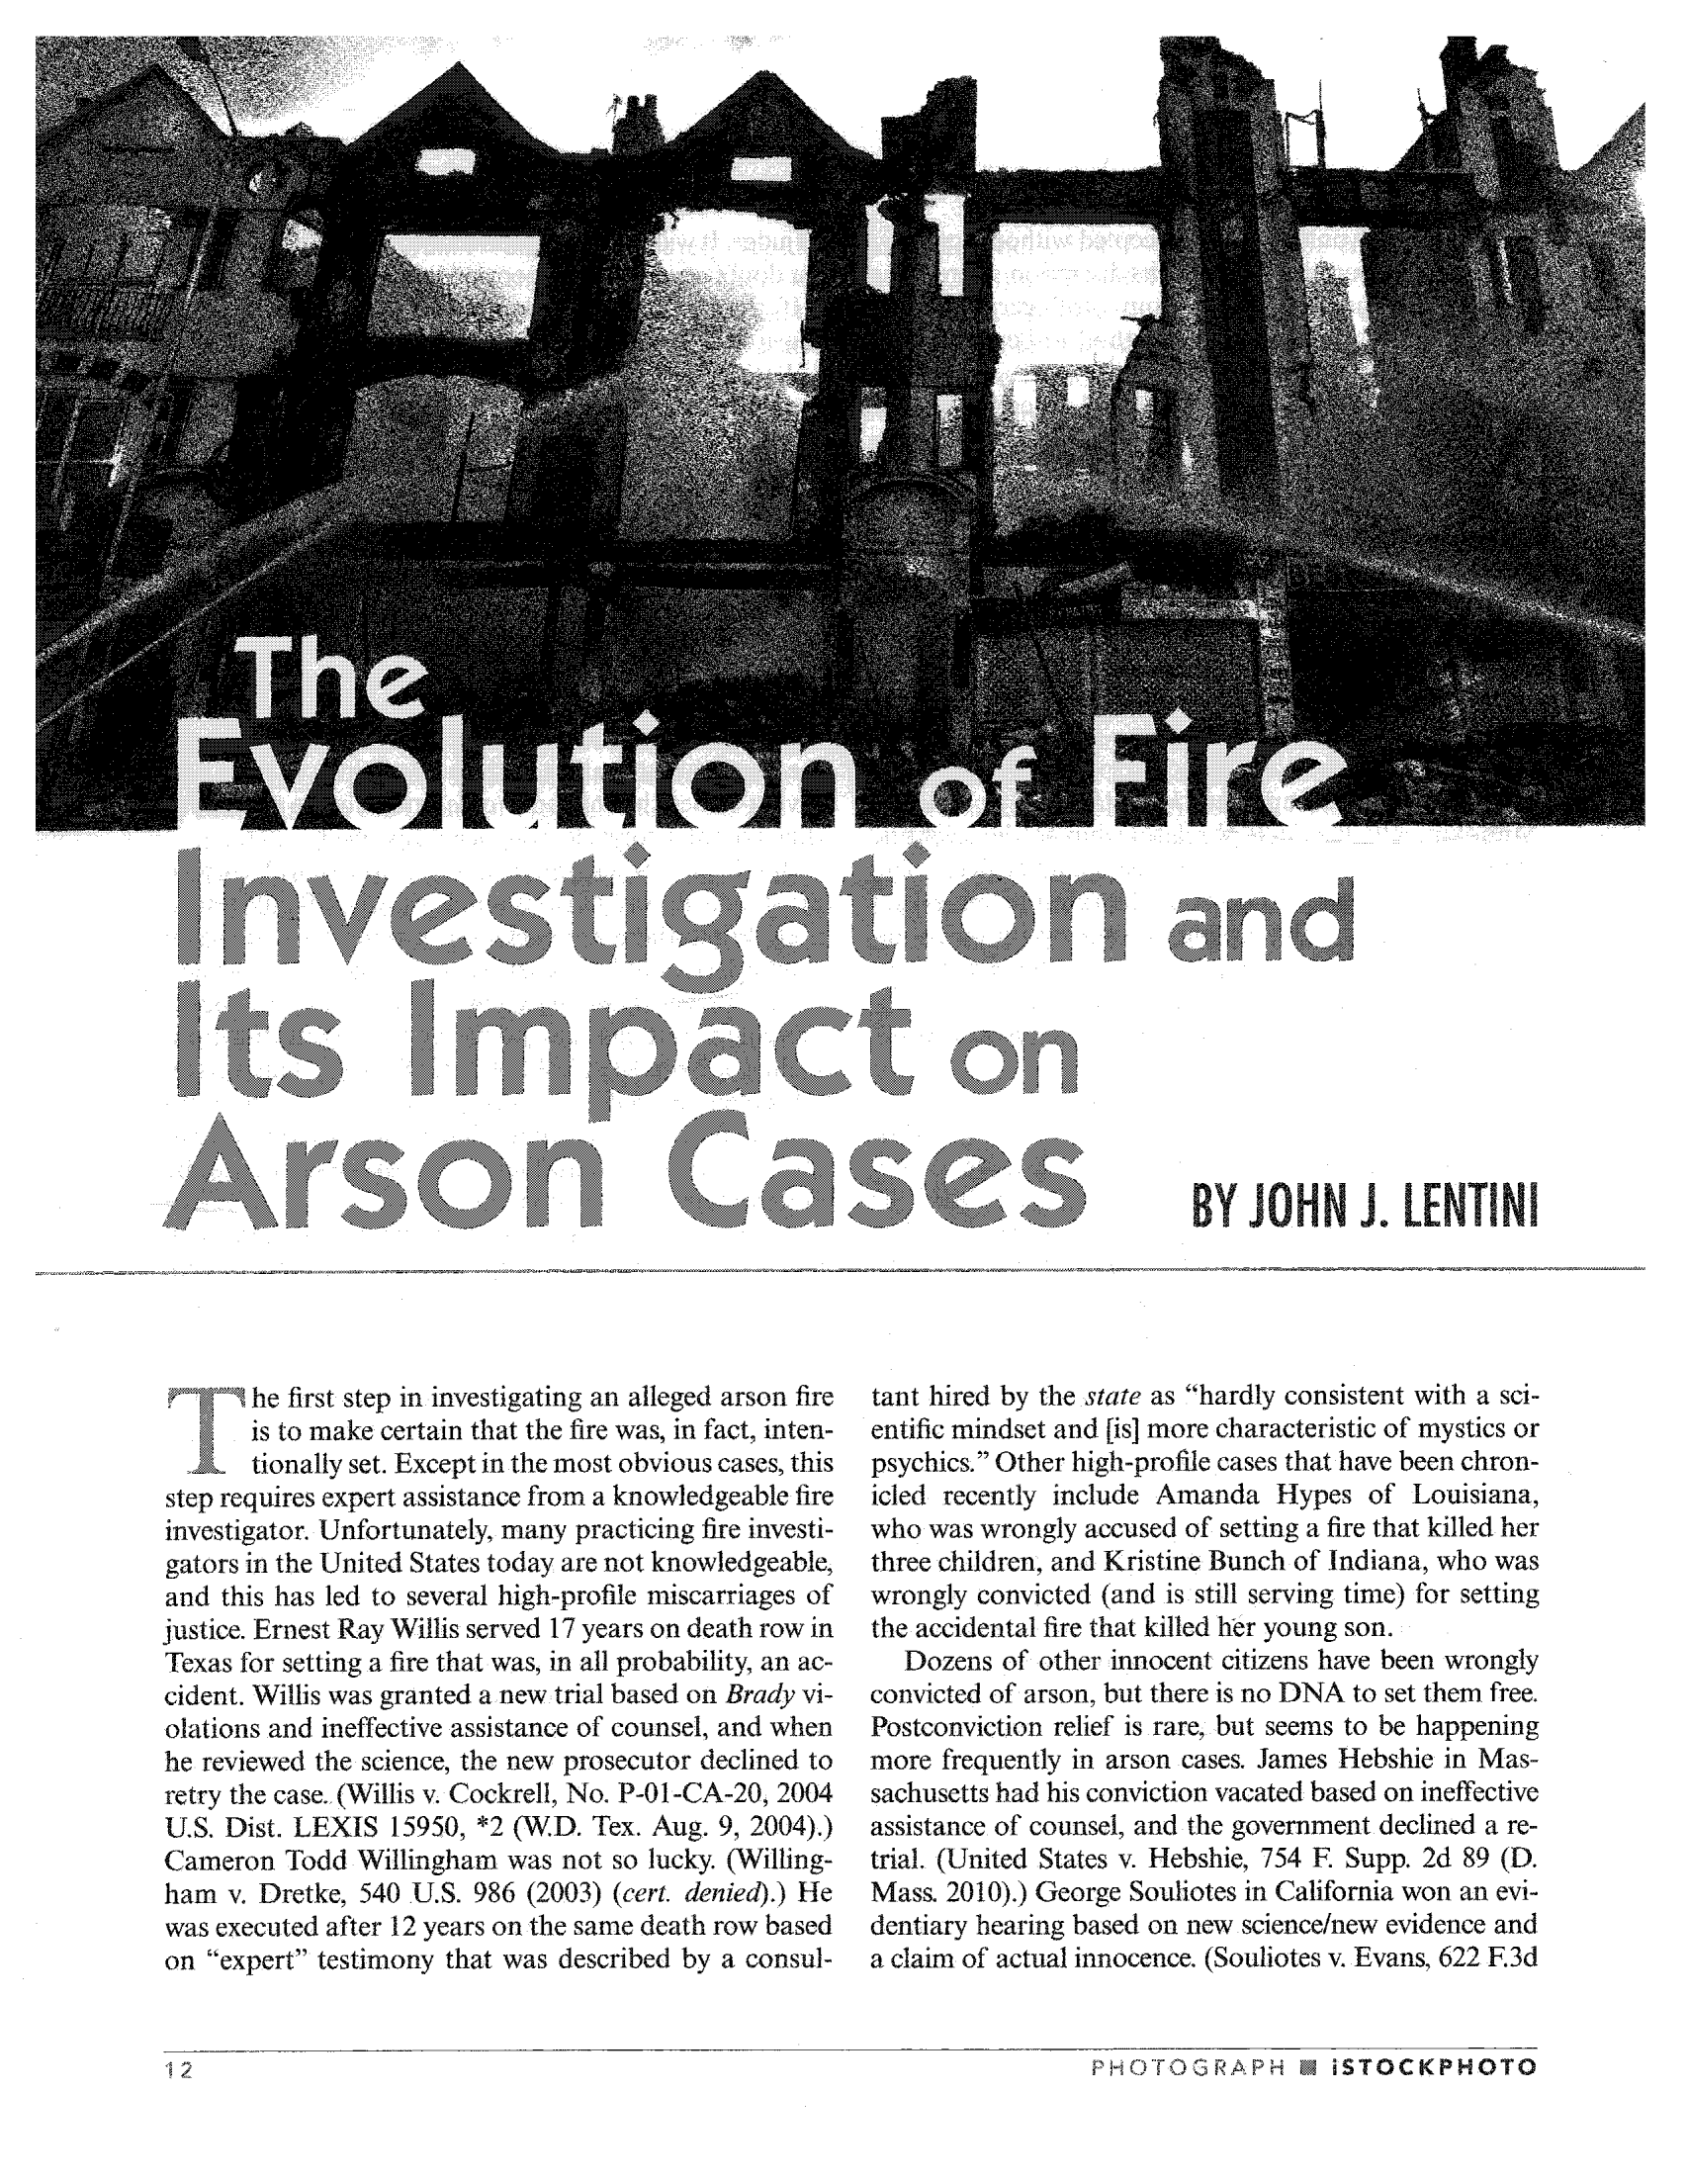 handle is hein.journals/cjust27 and id is 14 raw text is: he first step in investigating an alleged arson fire
is to make certain that the fire was, in fact, inten-
tionally set. Except in the most obvious cases, this
step requires expert assistance from a knowledgeable fire
investigator. Unfortunately,. many practicing fire investi-
gators in the United States today are not knowledgeable,
and this has led to several high-profile miscarriages of
justice. Ernest Ray Willis served 17 years on death row in
Texas for setting .a fire that was, in all probability, an ac-
cident. Willis was granted a new trial based on Brady vi-
olations -and ineffective assistance of counsel, and when
he reviewed the science, the new prosecutor declined to
retry the case.. (Willis v. Cockrell, No. P-01-CA-20, 2004
U.S. Dist. LEXIS 15950, *2 (W.D. Tex. Aug.. 9, 2004).)
Cameron Todd Willingham was not so lucky. (Willing-
ham v. Dretke, 540 U.S. 986 (2003) (cert. denied).) He
was executed after 12 years on the same death row based
on expert testimony that was described by a consul-

tant hired by the state as hardly consistent with a sci-
entific mindset and [is] more characteristic of mystics or
psychics. Other high-profile cases that have been chron-
icled recently include Amanda Hypes of Louisiana,
who was wrongly accused of setting a fire that killed her
three children, and Kristine Bunch of Indiana, who was
wrongly convicted (and is still serving time) for setting
the accidental fire that killed her young son. .
Dozens of other innocent citizens have been wrongly
convicted of arson, but there is no DNA to set them free.
Postconviction relief is rare,. but seems to be happening
more frequently in arson cases. James Hebshie in Mas-
sachusetts had his conviction vacated based on ineffective
assistance. of counsel, and the government declined a re-
trial. (United States v. Hebshie, 754 E Supp. 2d 89 (D.
Mass. 2010).) George Souliotes in California won an evi-
dentiary hearing based on new science/new evidence and
a claim of actual innocence. (Souliotes v. Evans, 622.3d

PHOTOGRAPH M i STOCKPHOTO

ItI 10

ti.. ' and

on

i,,so n.. cases

wU Y JOu, H'N 1.0L E r  NI


